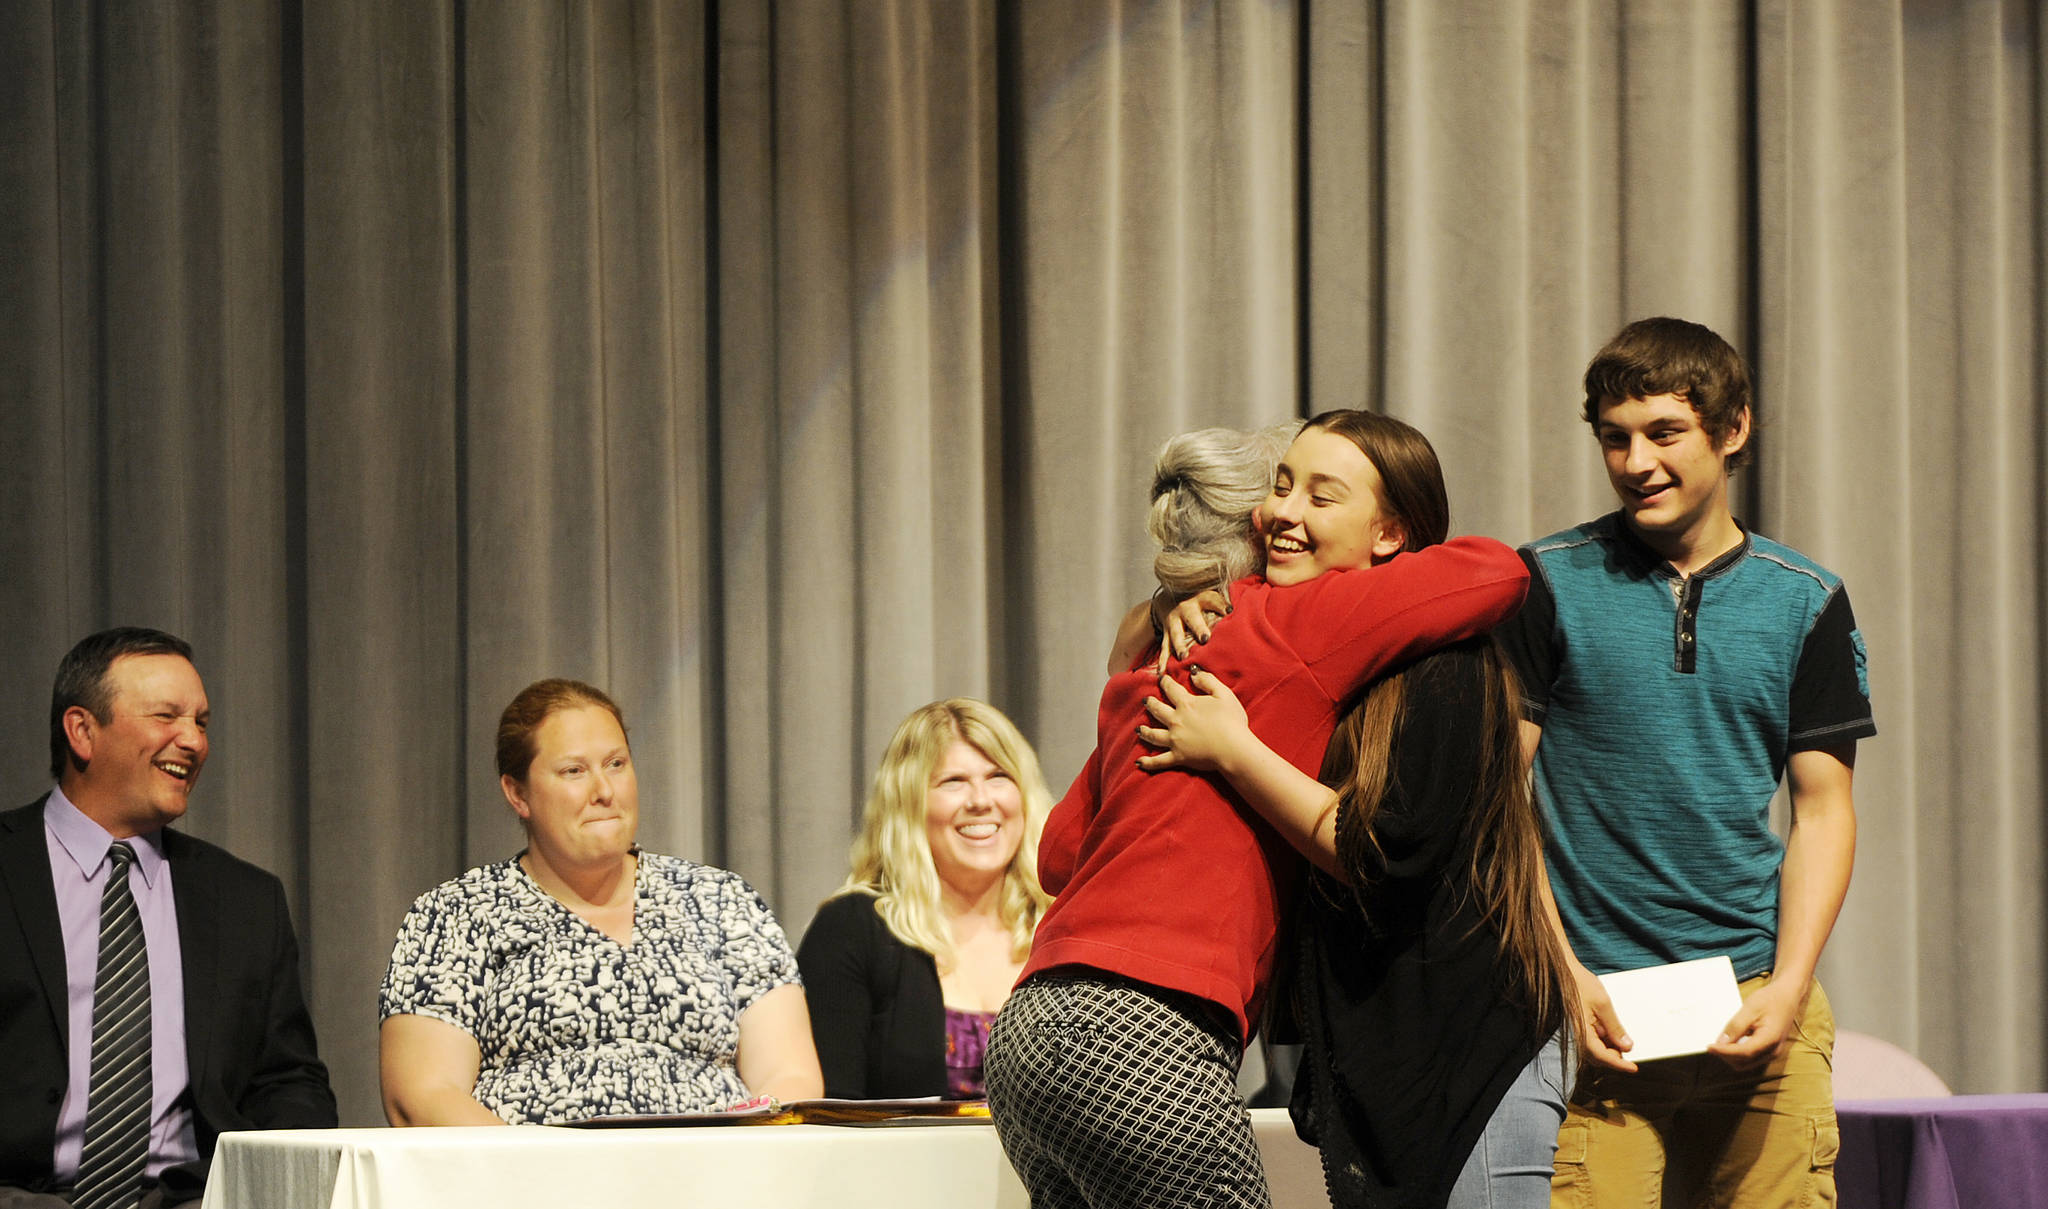 Mary Jane Duncan gives Bob Duncan Memorial Scholarships and hugs to SHS graduating seniors Chloe Ann Erickson and Levi Foy; from left, Sequim High School principal Shawn Langston and counselors Erin Fox and Melee Vandervelde look on. Sequim Gazette photo by Michael Dashiell